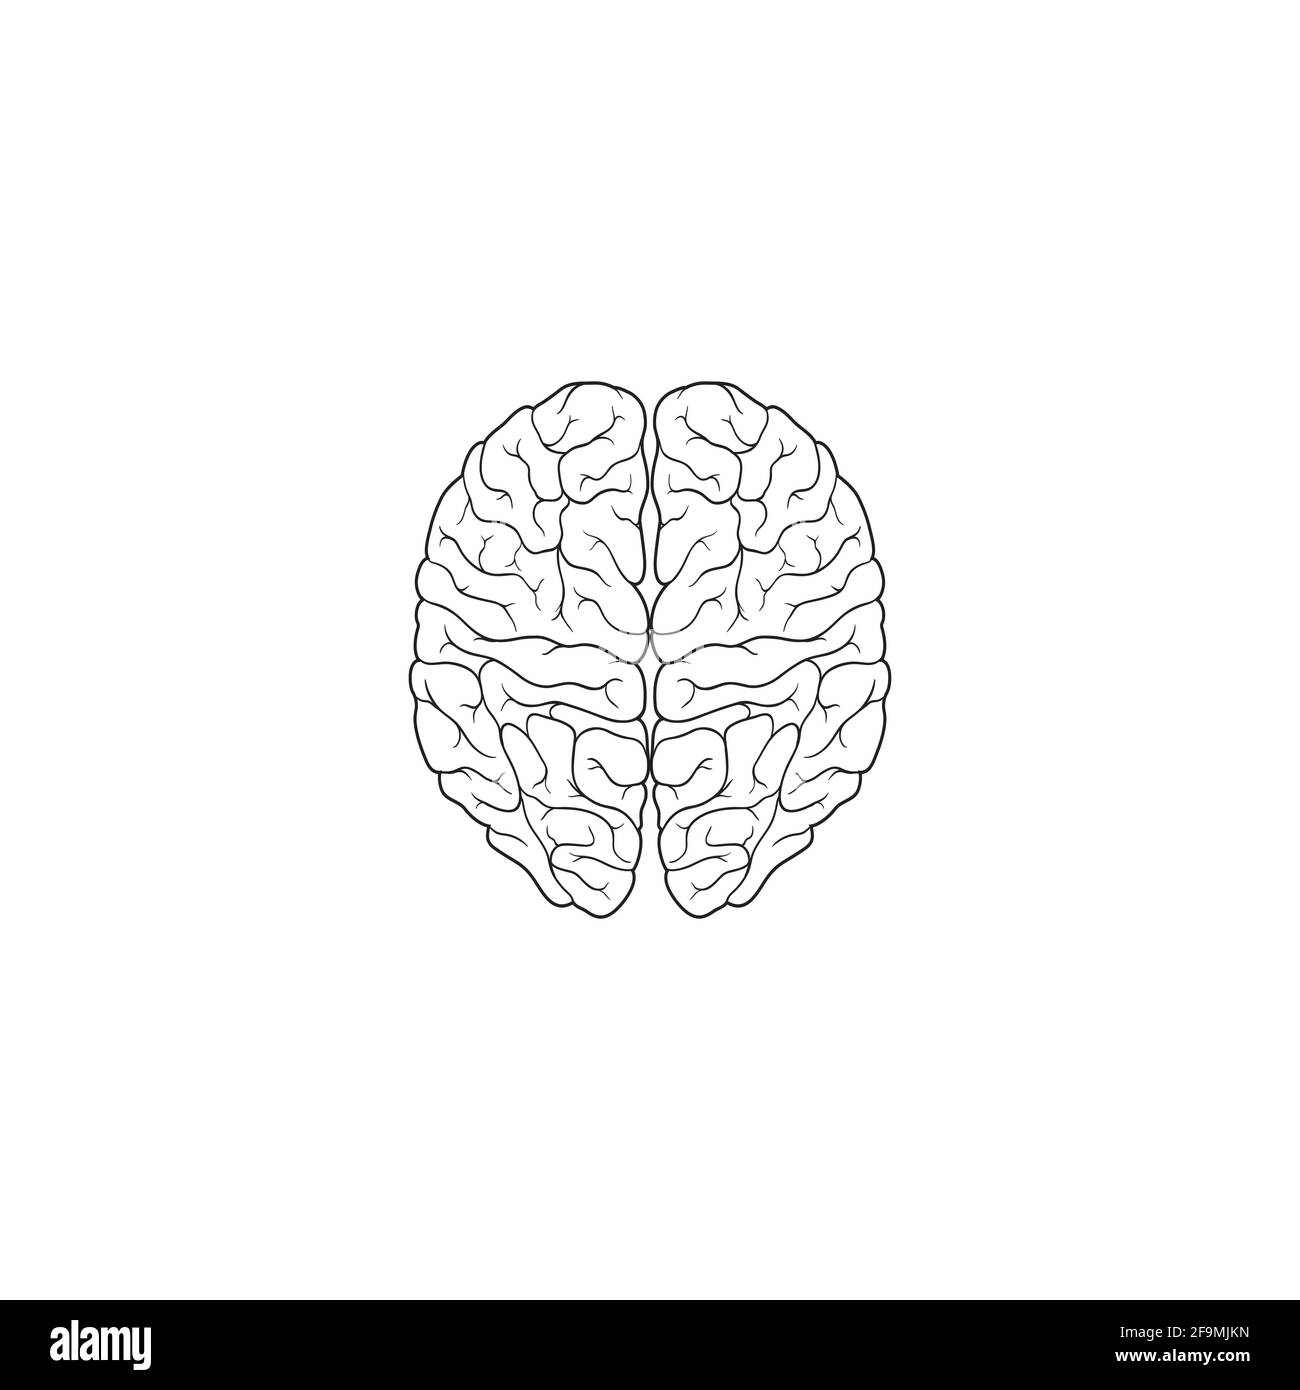 Modern Human Brain Line Icon Vector illustration. Simple brain of human outline icon. Top View Brain Symbol isolated on white background. Stock Vector